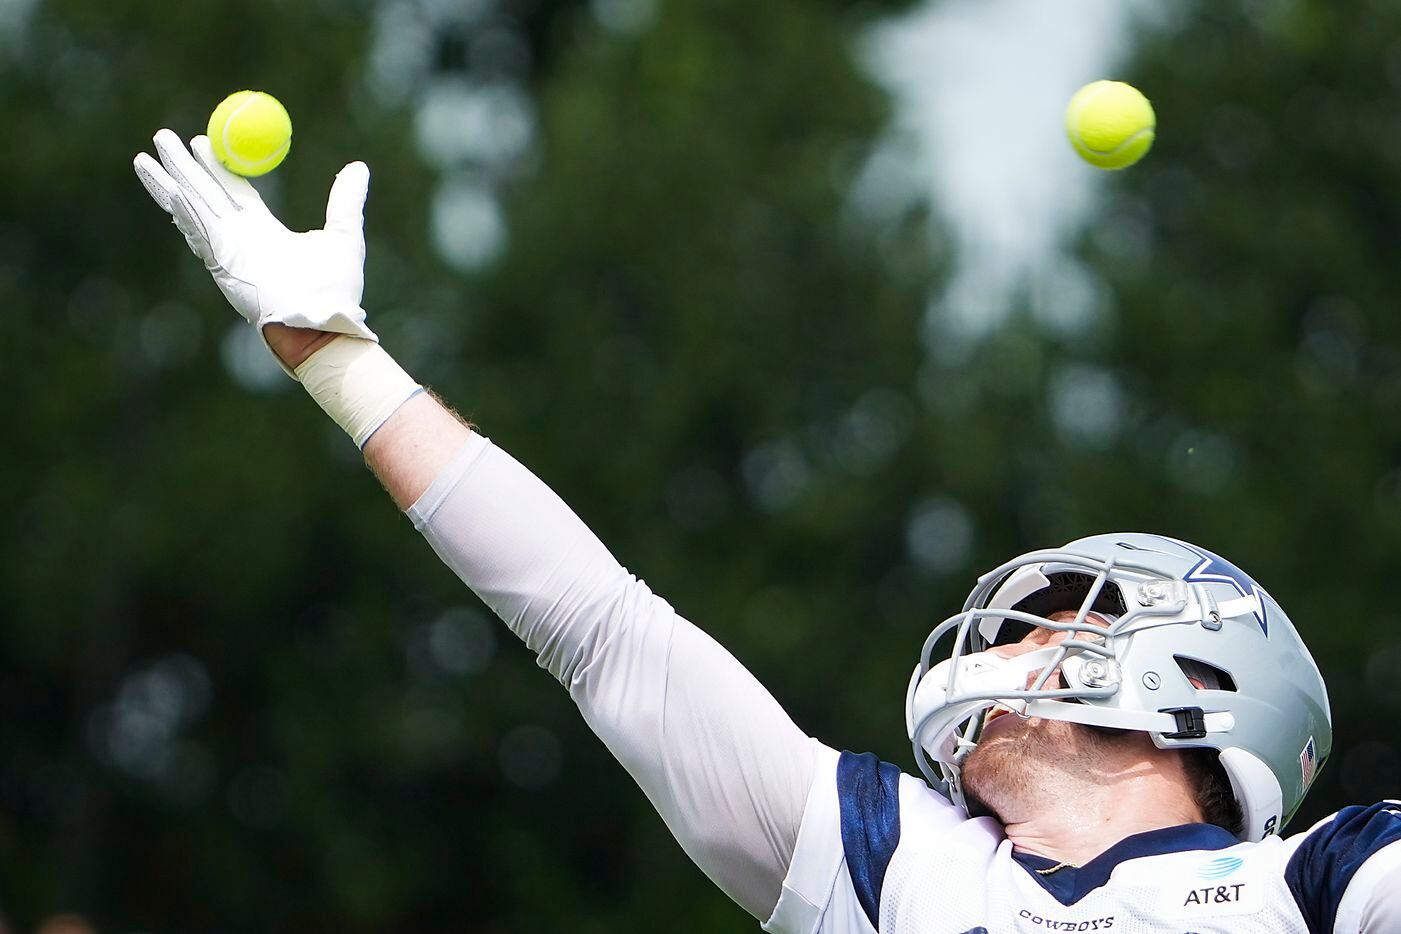 Dallas Cowboys tight end Blake Jarwin tries to catch tennis balls in a drill during a minicamp practice at The Star on Tuesday, June 8, 2021, in Frisco. (Smiley N. Pool/The Dallas Morning News)